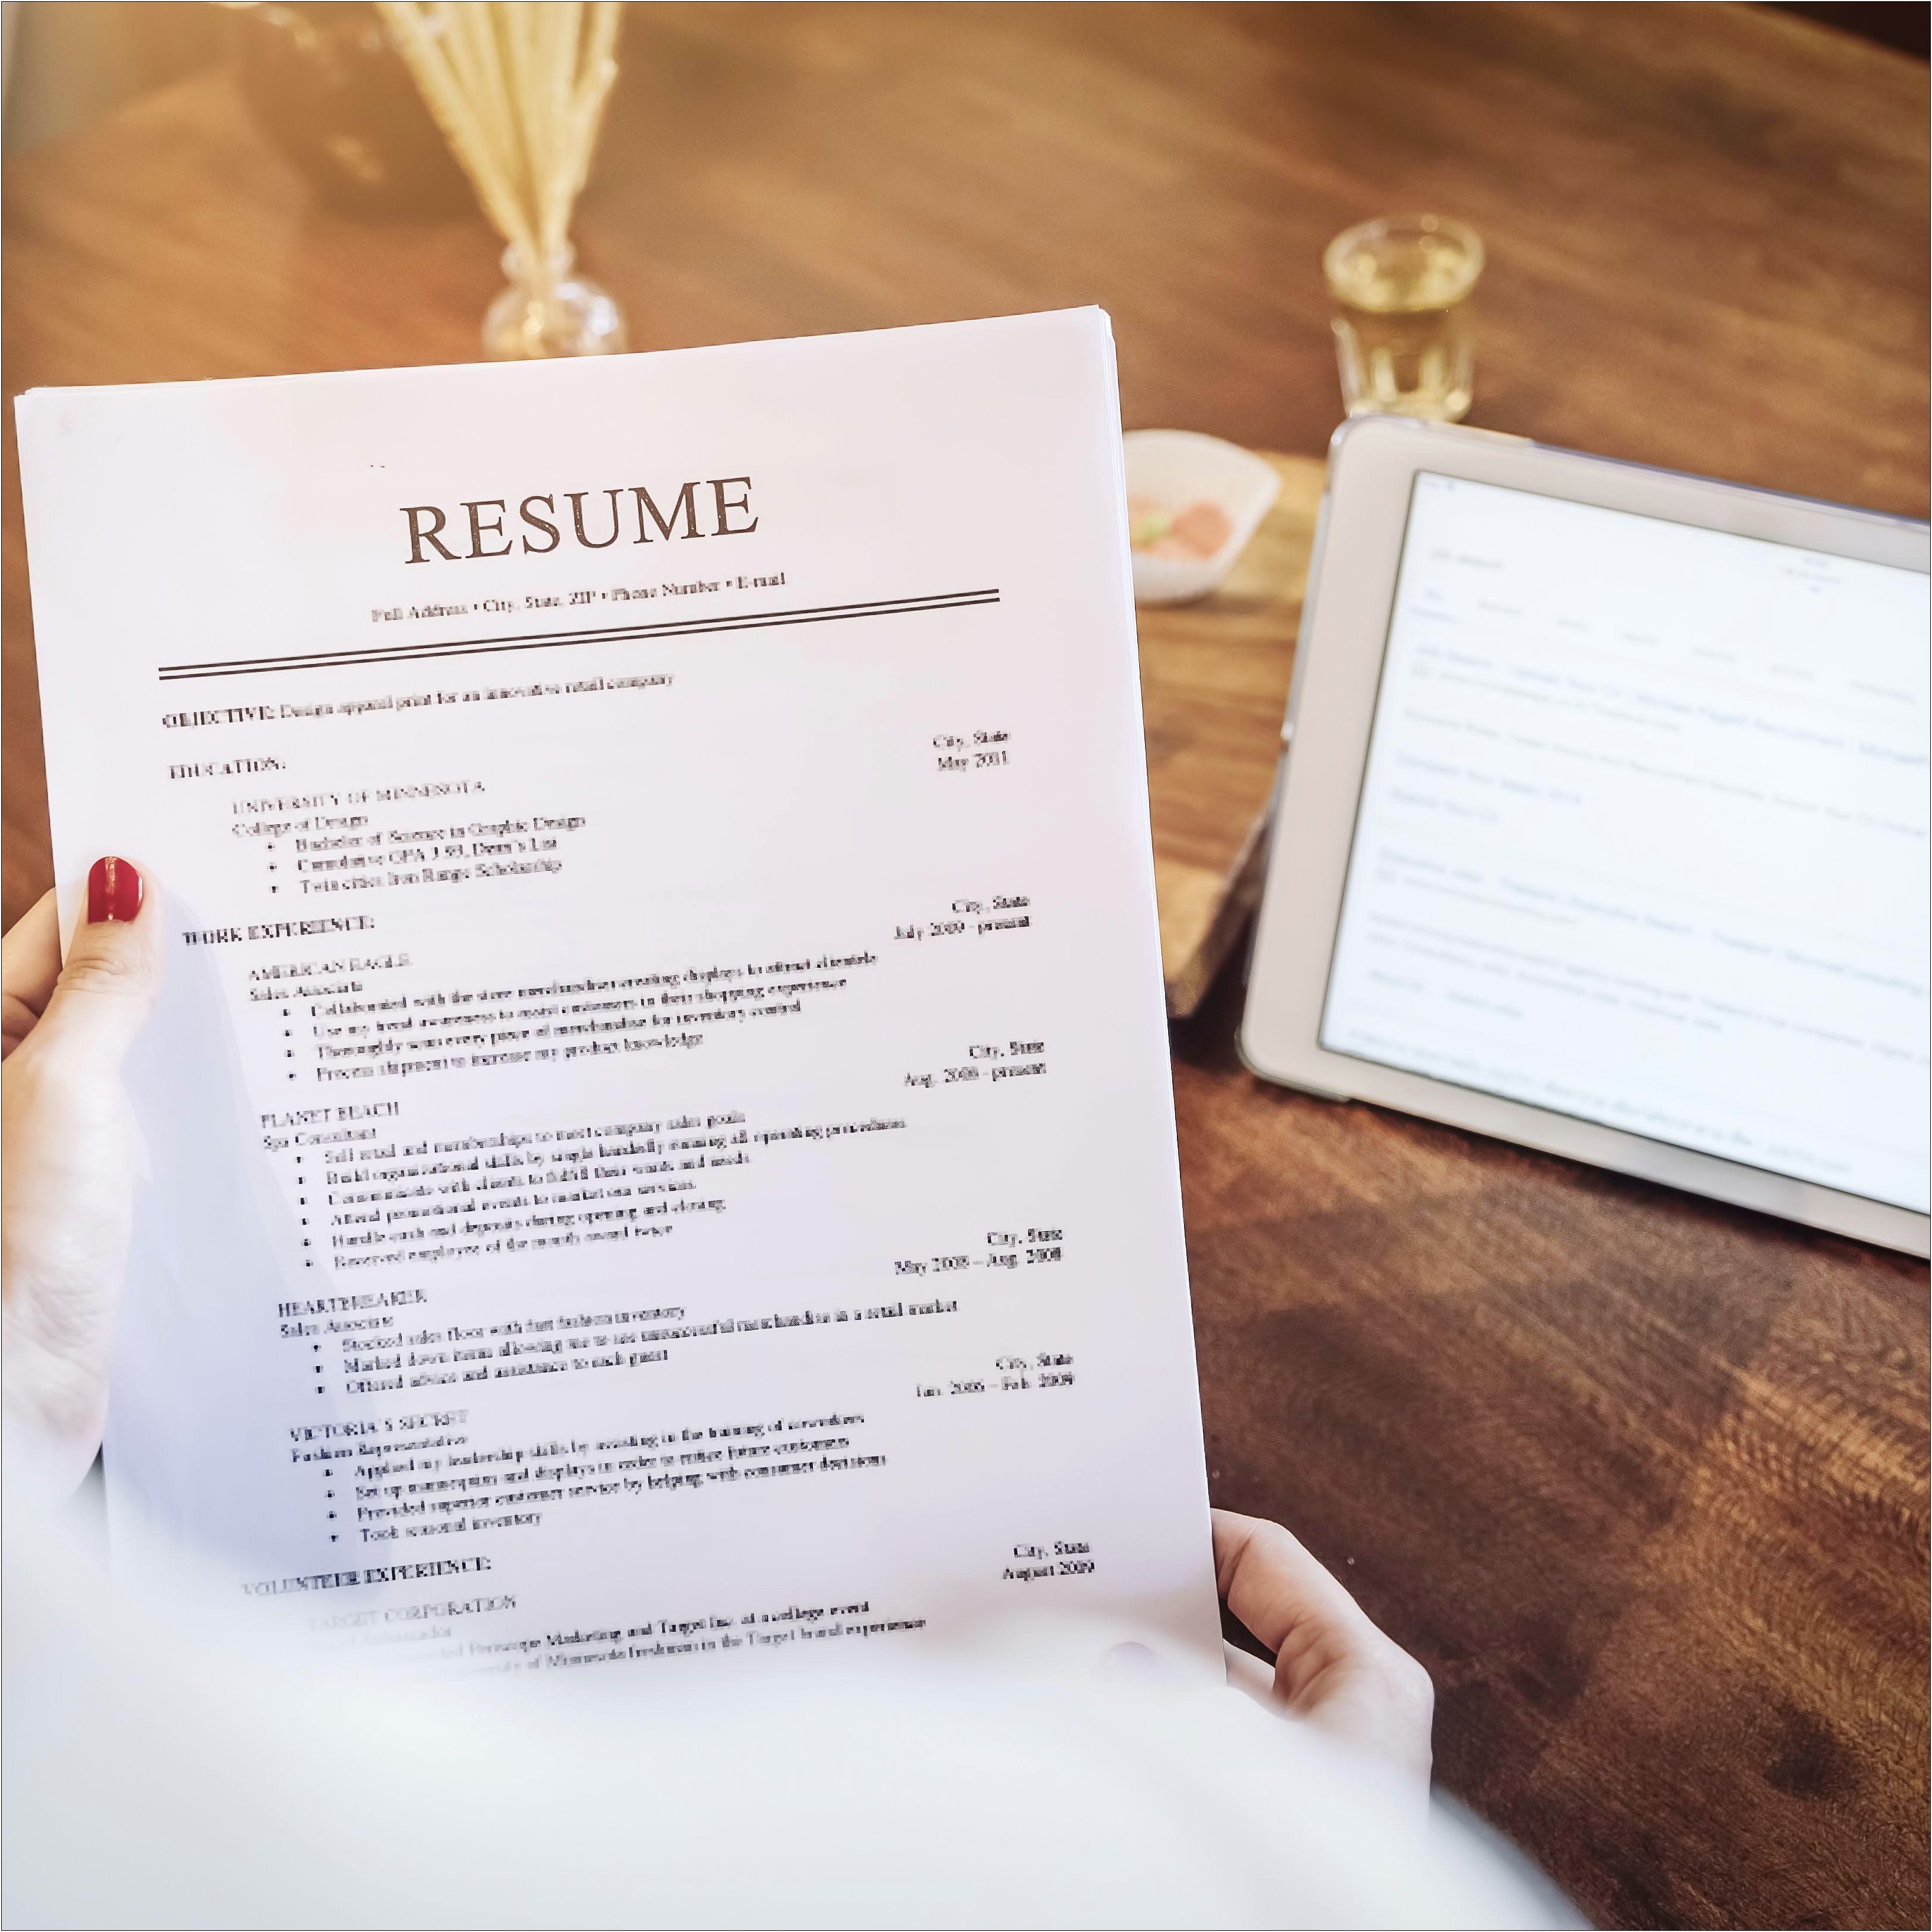 Is Objective Important In Resume For Tracker